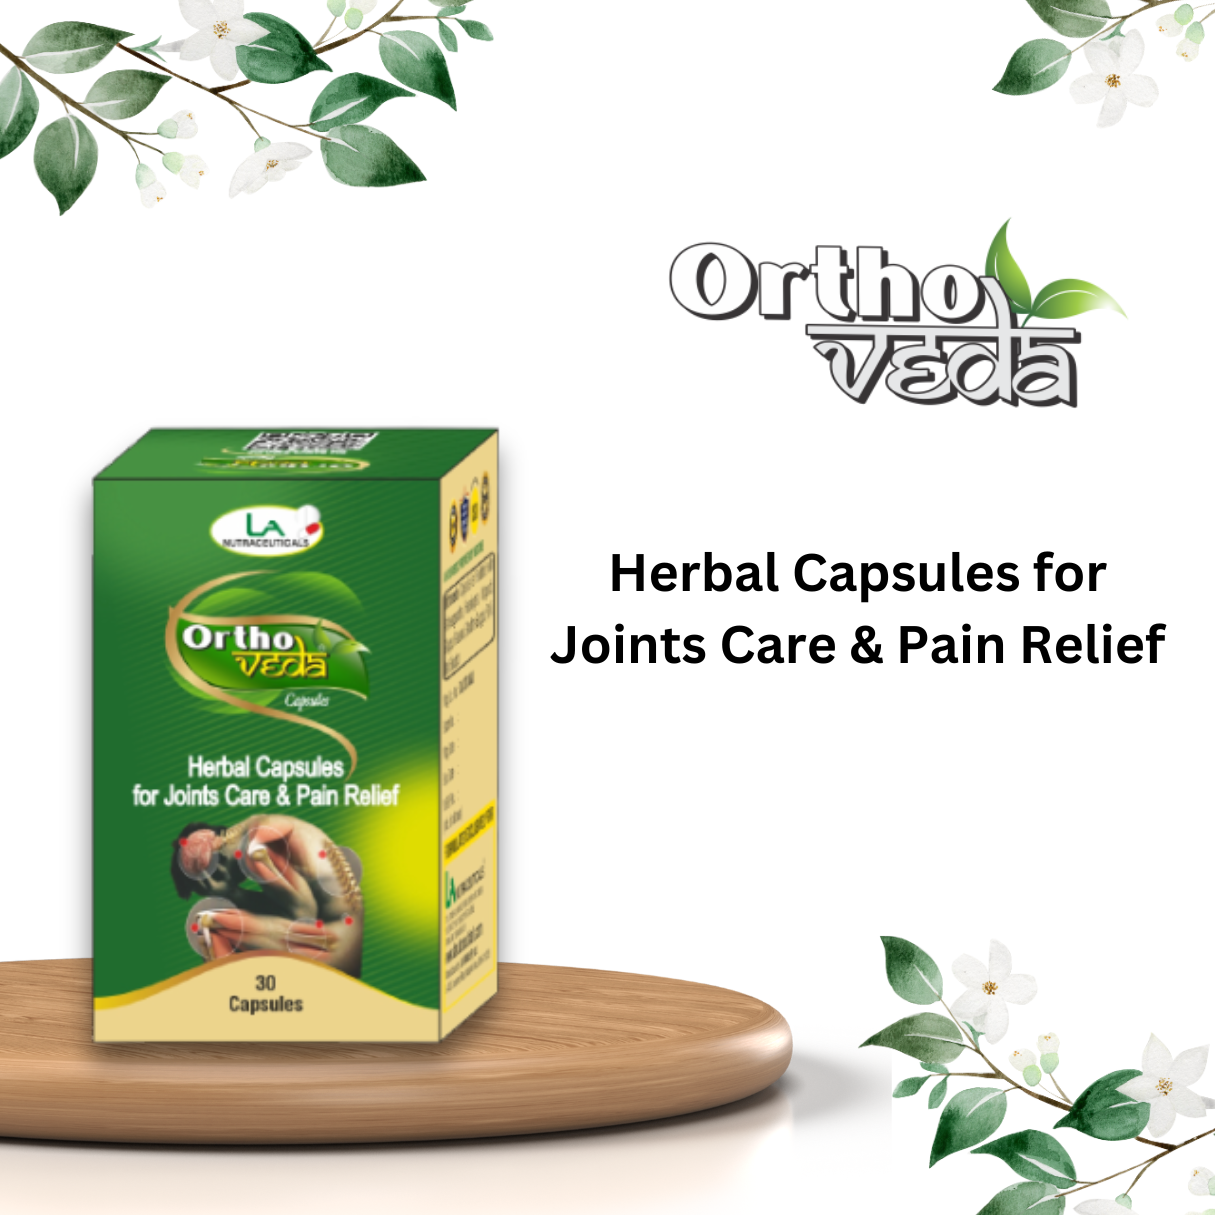 Orthoveda Capsules - effective for All Kinds of Joint Pain